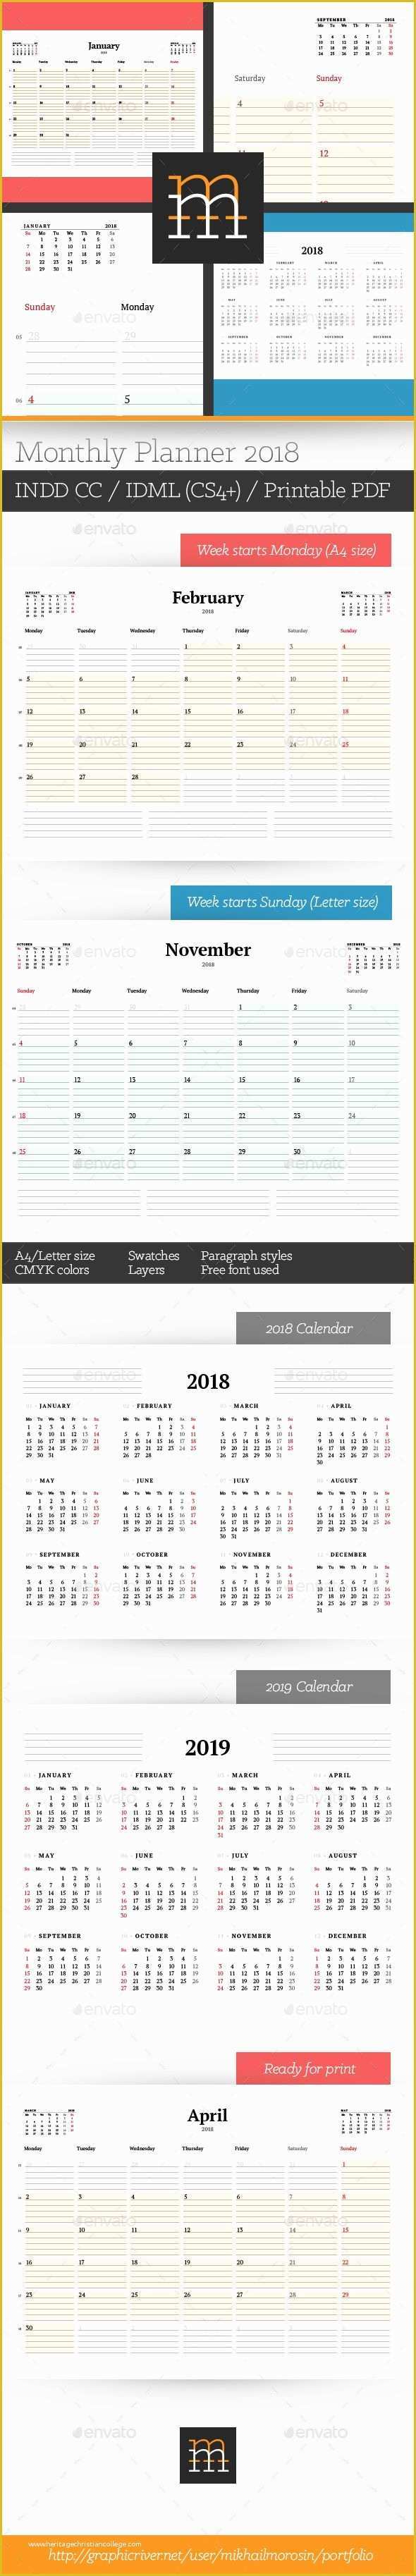 Free Indesign Calendar Template 2018 Of 25 Best Ideas About Monthly Planner Template On Pinterest